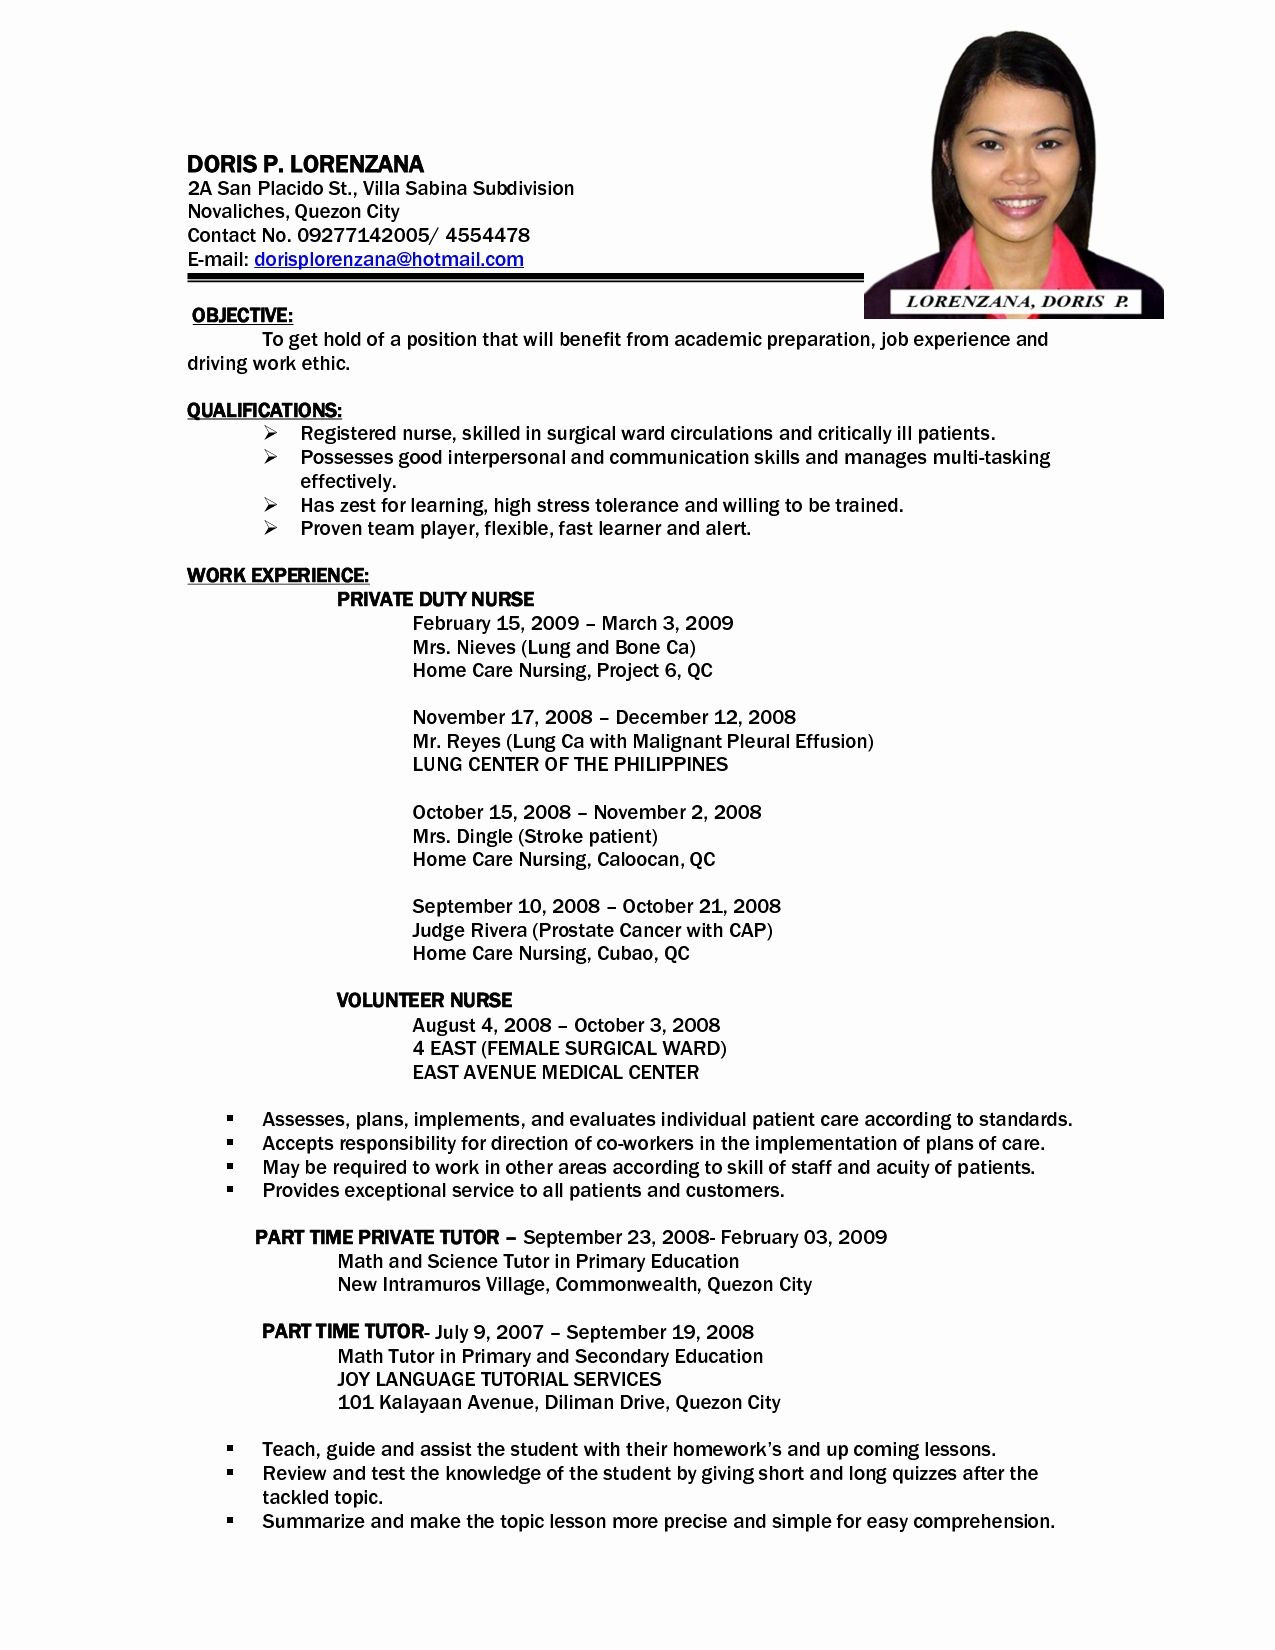 Sample Resume for Fresh Graduate Nurses without Experience Philippines Filipino Resume Sample – Derel